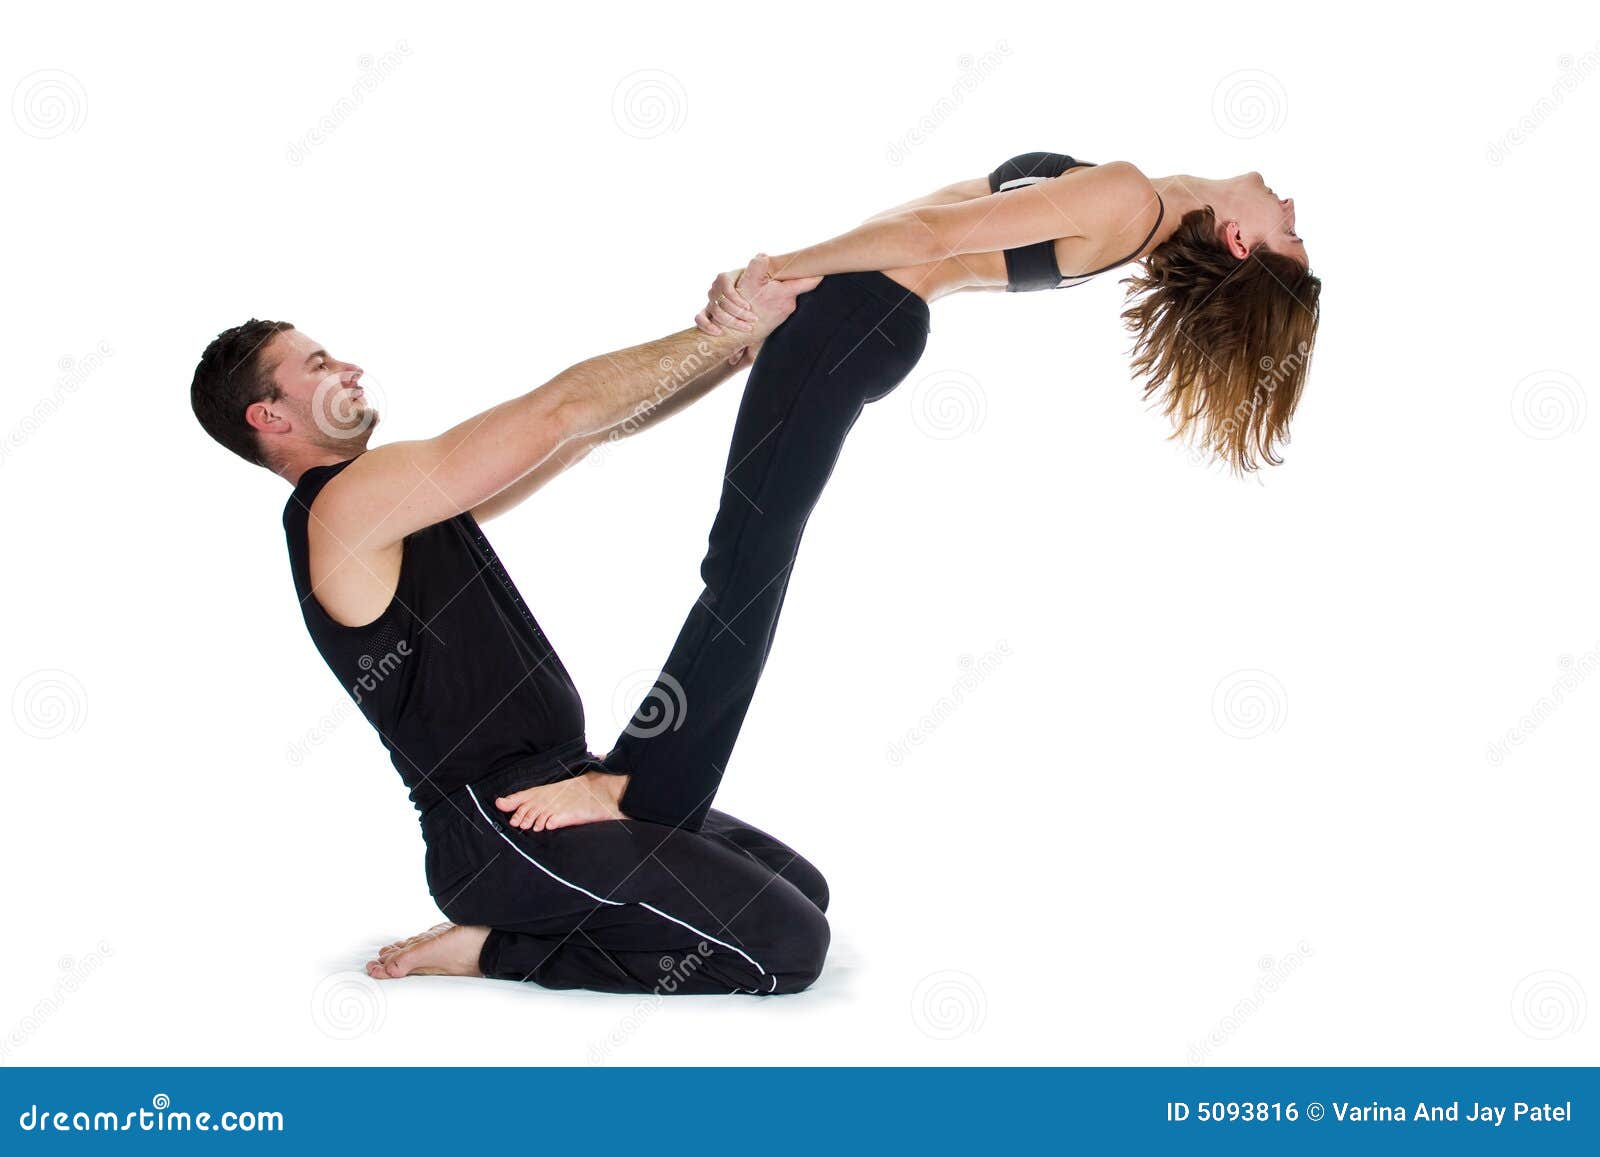 Yoga For Two - Series Stock Photo. Image Of Skin, Movement - 5093816